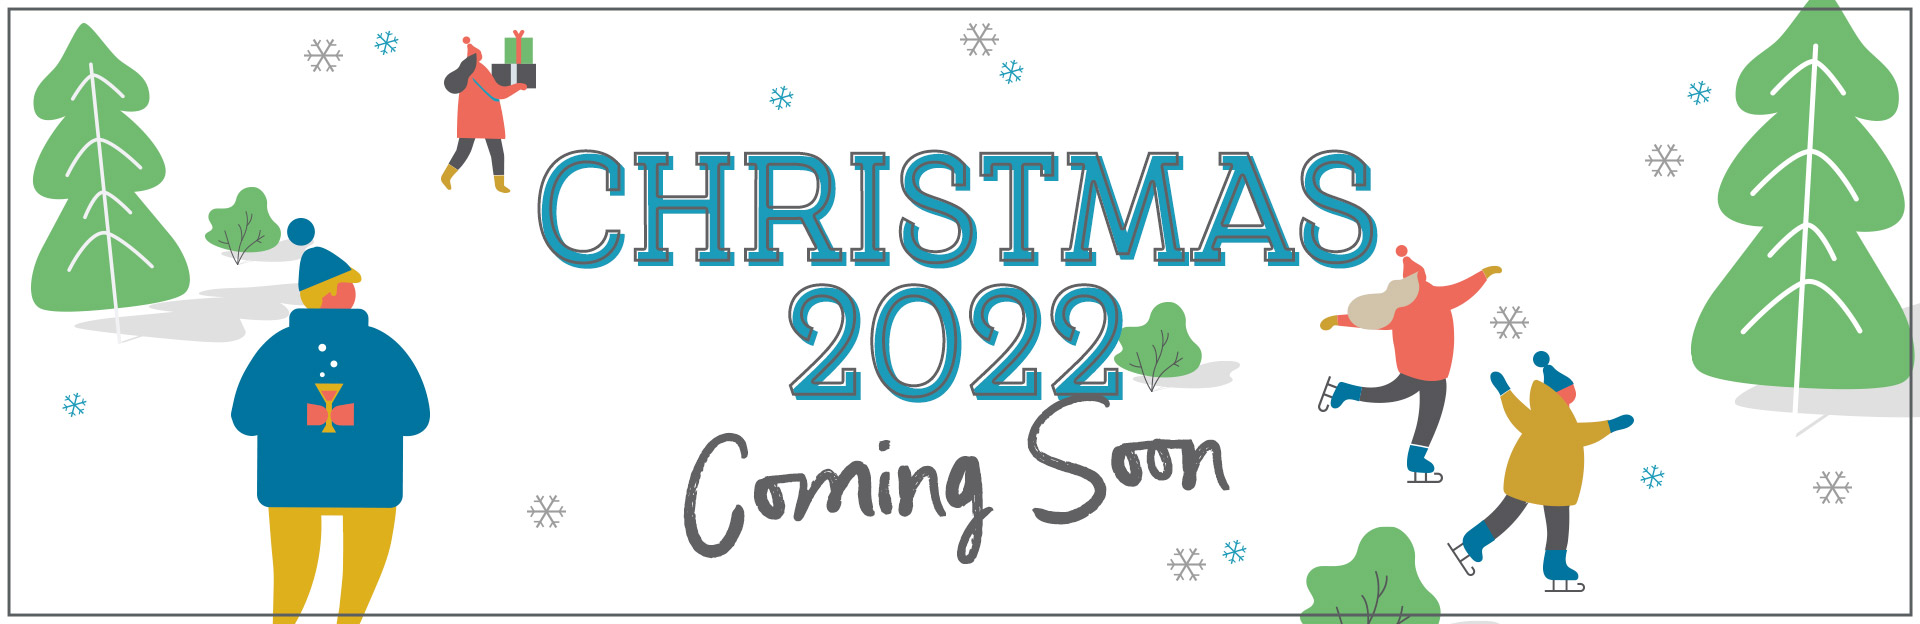 Christmas 2021 at The Shepherds| Great Value Family Food